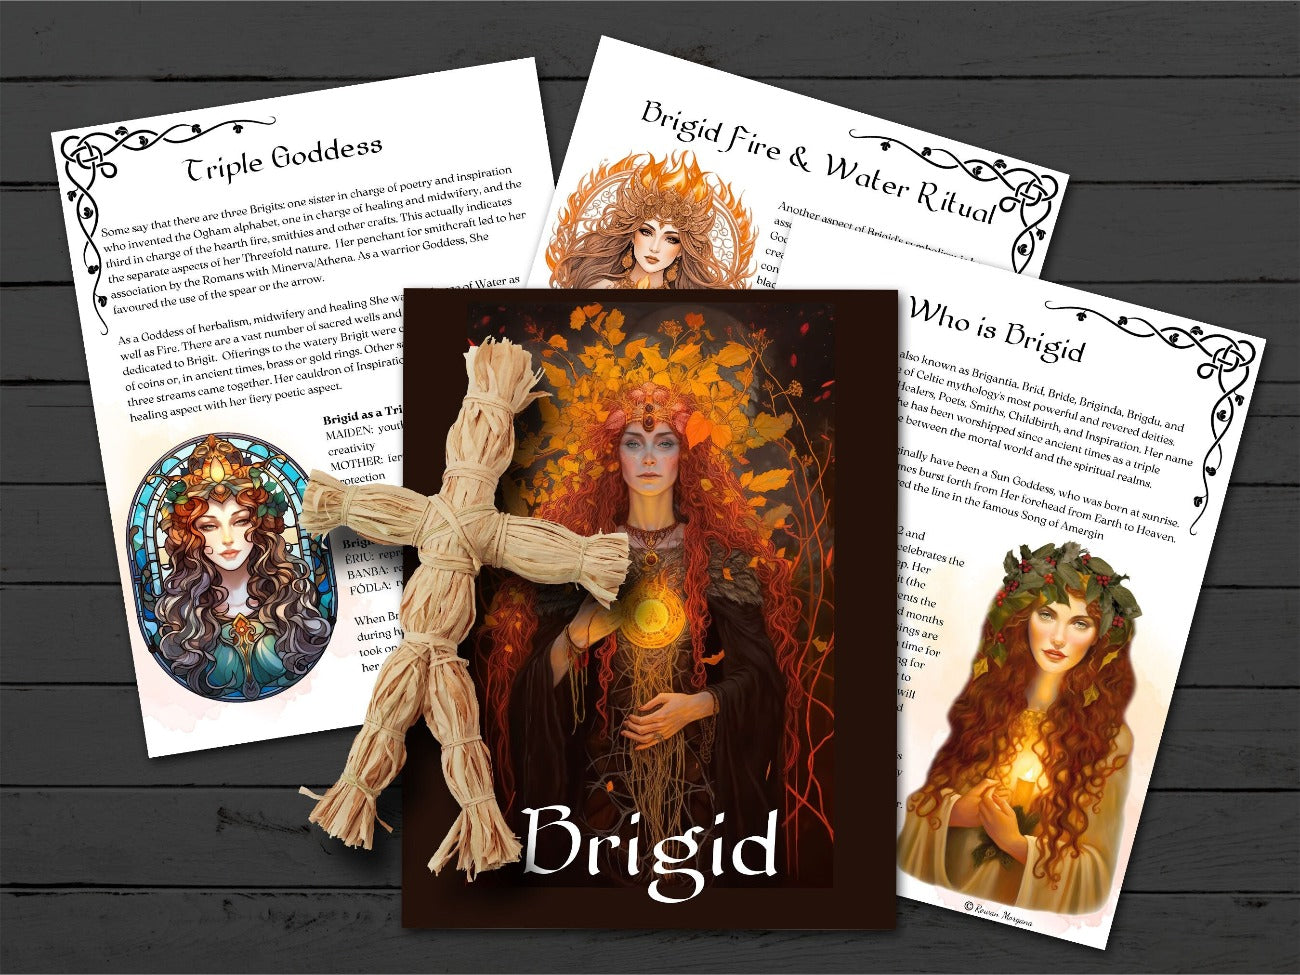 GODDESS BRIGID pages, Triple Goddess, Brigid Fire and Water Ritual, Title Page, and Who is Brigid - Morgana Magick Spell